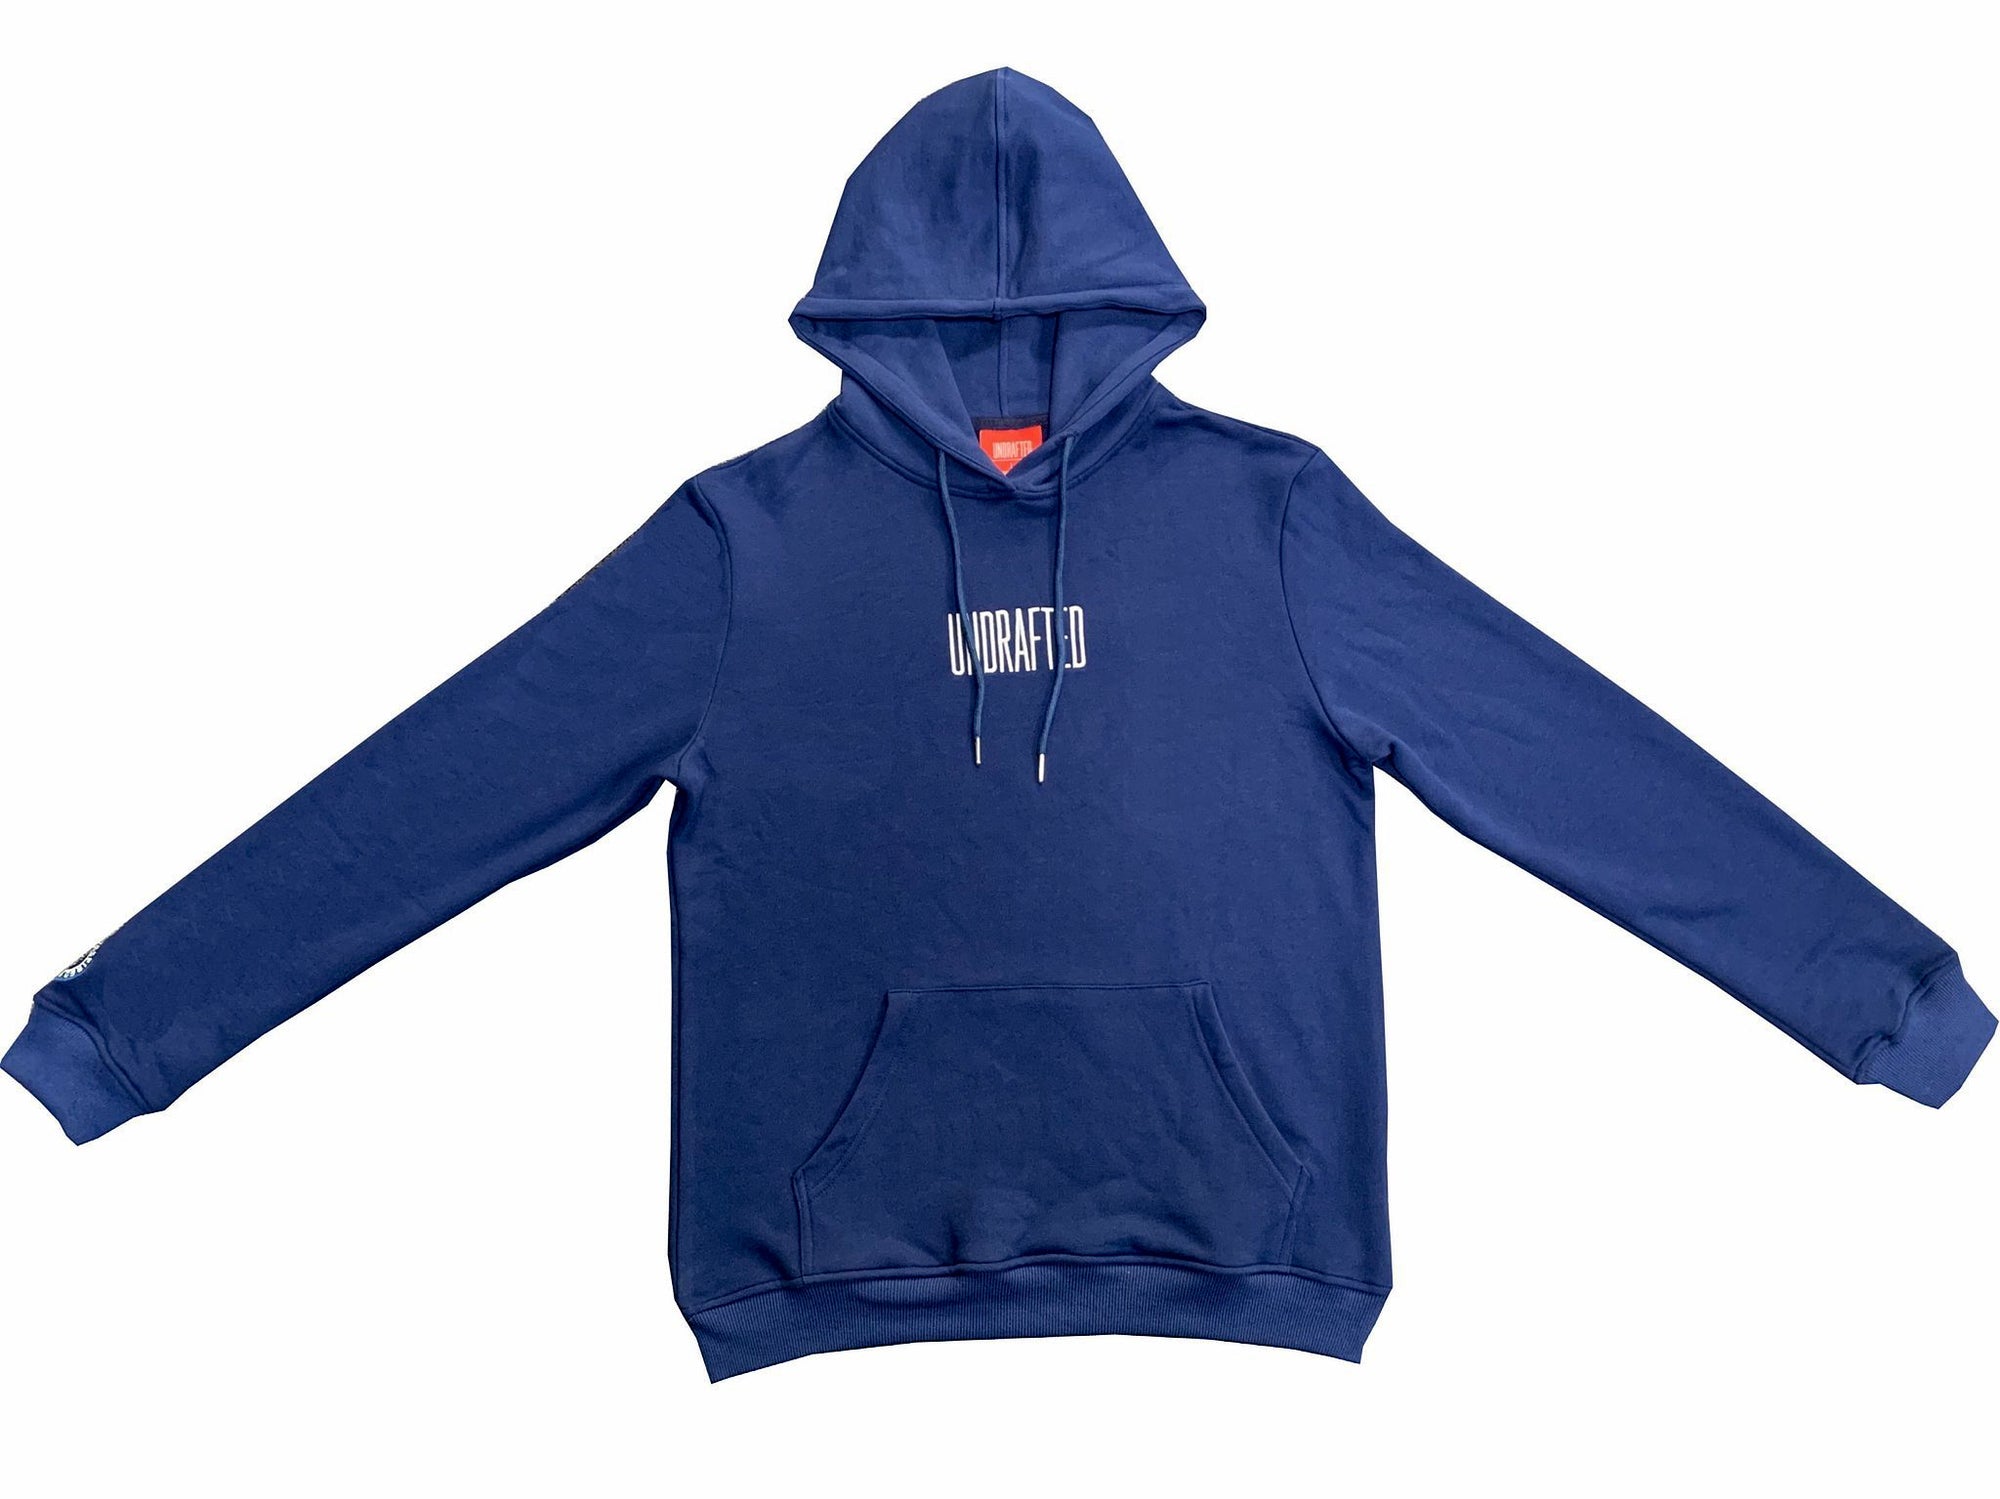 Undrafted Hoodie- Navy Blue/White